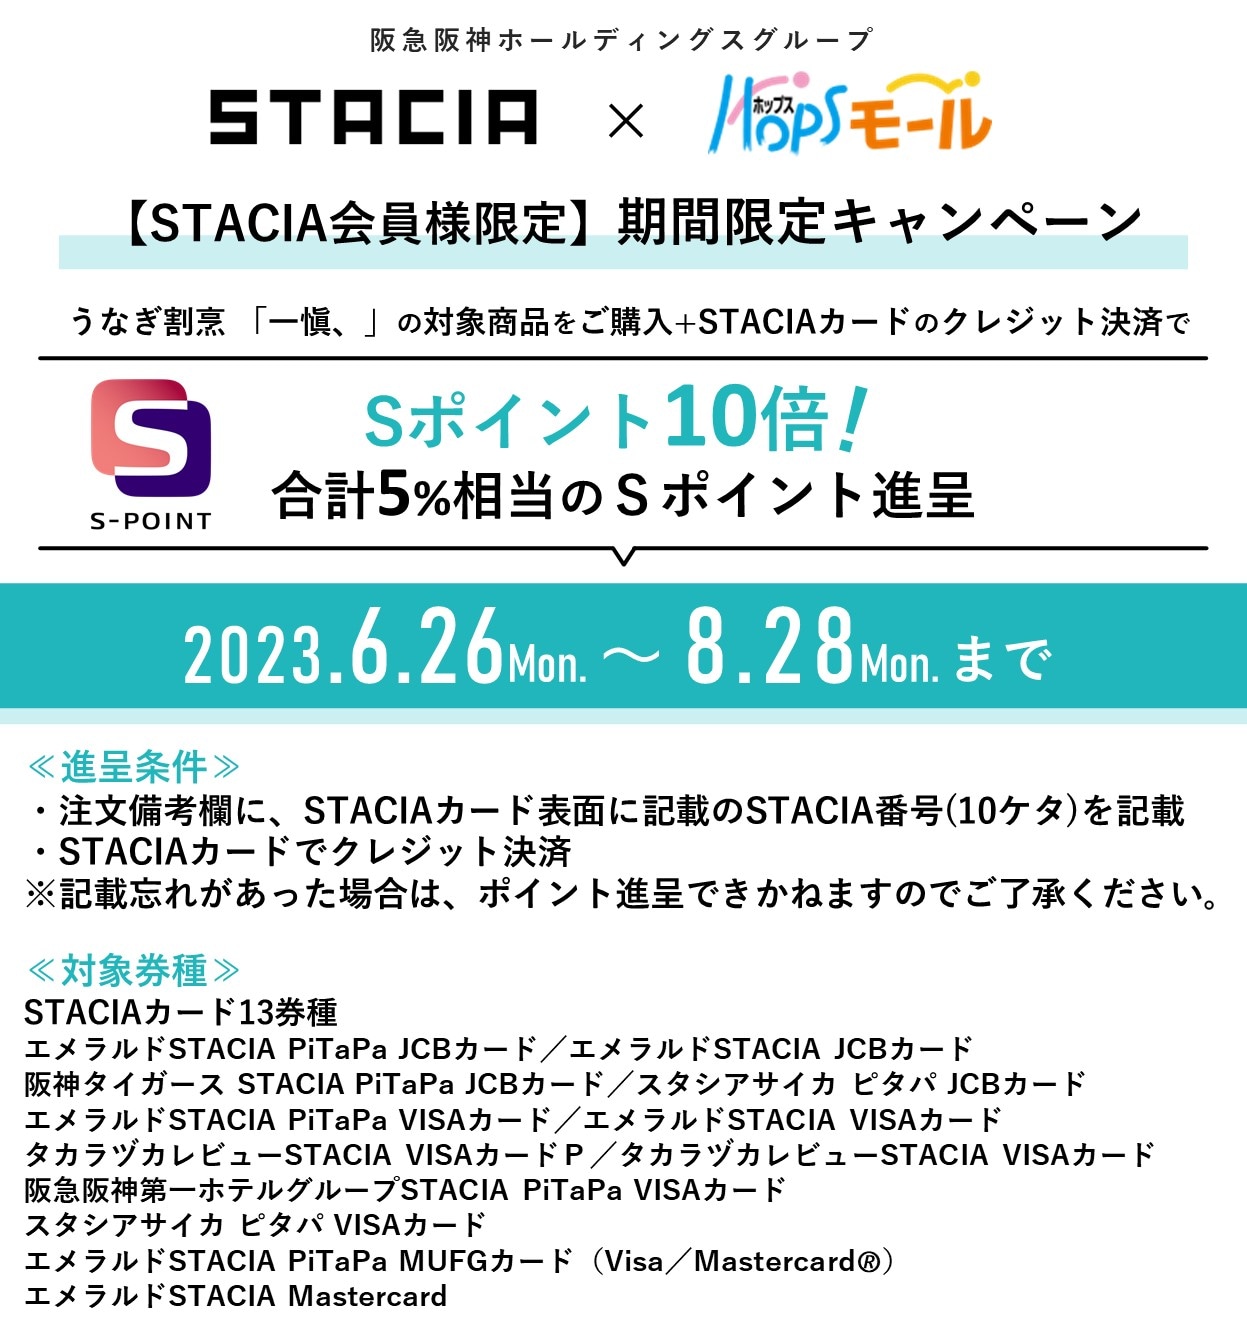 STACIA会員様限定期間限定キャンペーン